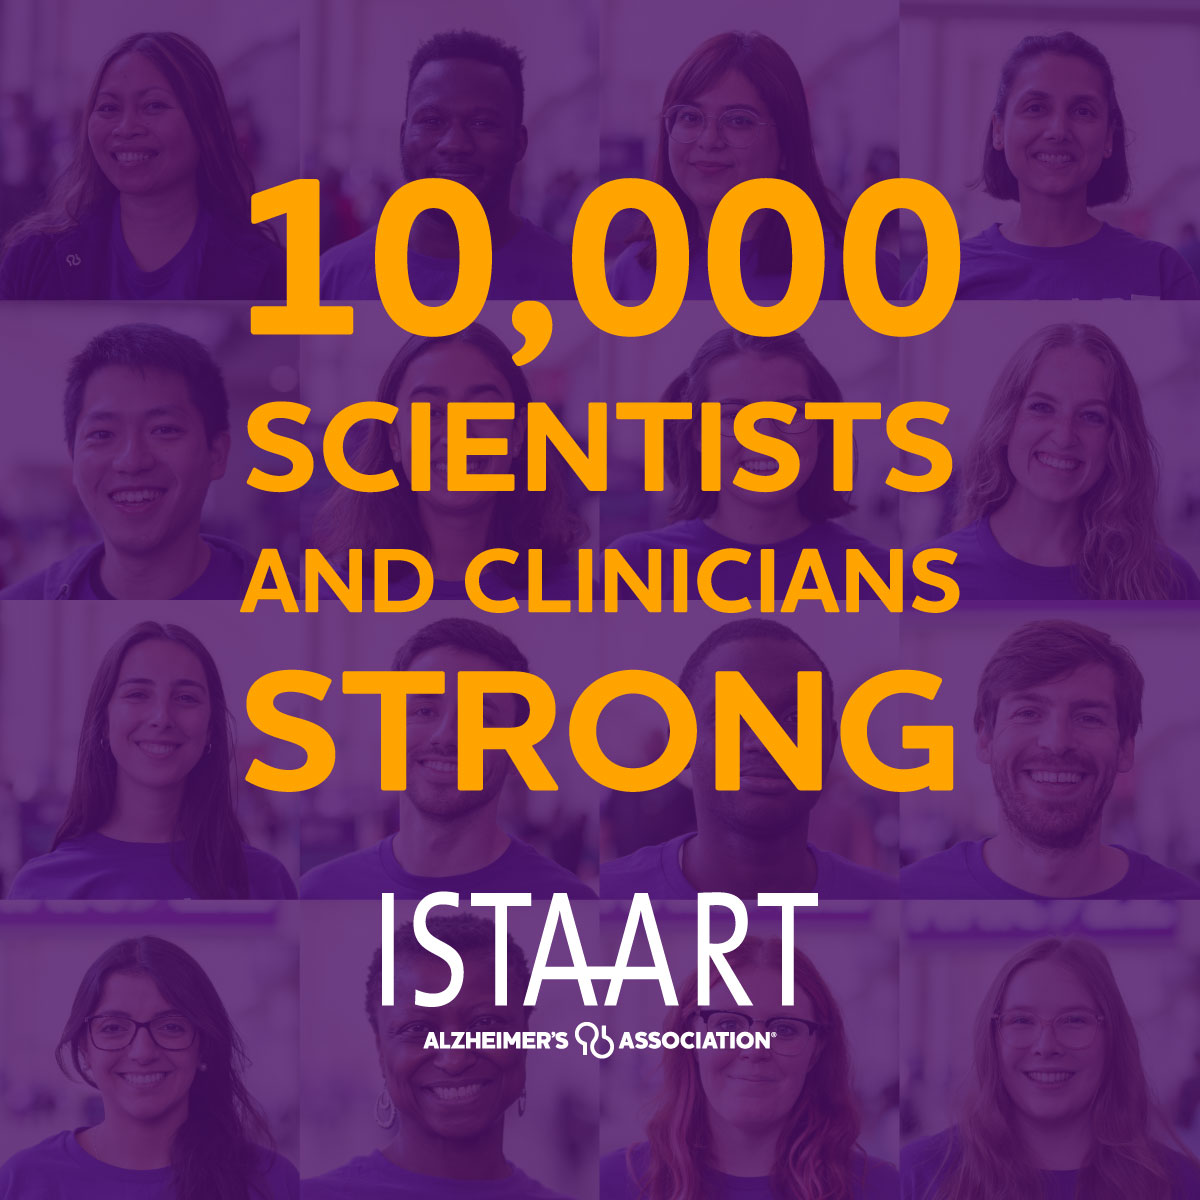 With discounted rates and free student memberships, there’s never been a better time to join the over 10,000 members of @ISTAART’s global network. Learn more and join me: alz.org/ISTAART.